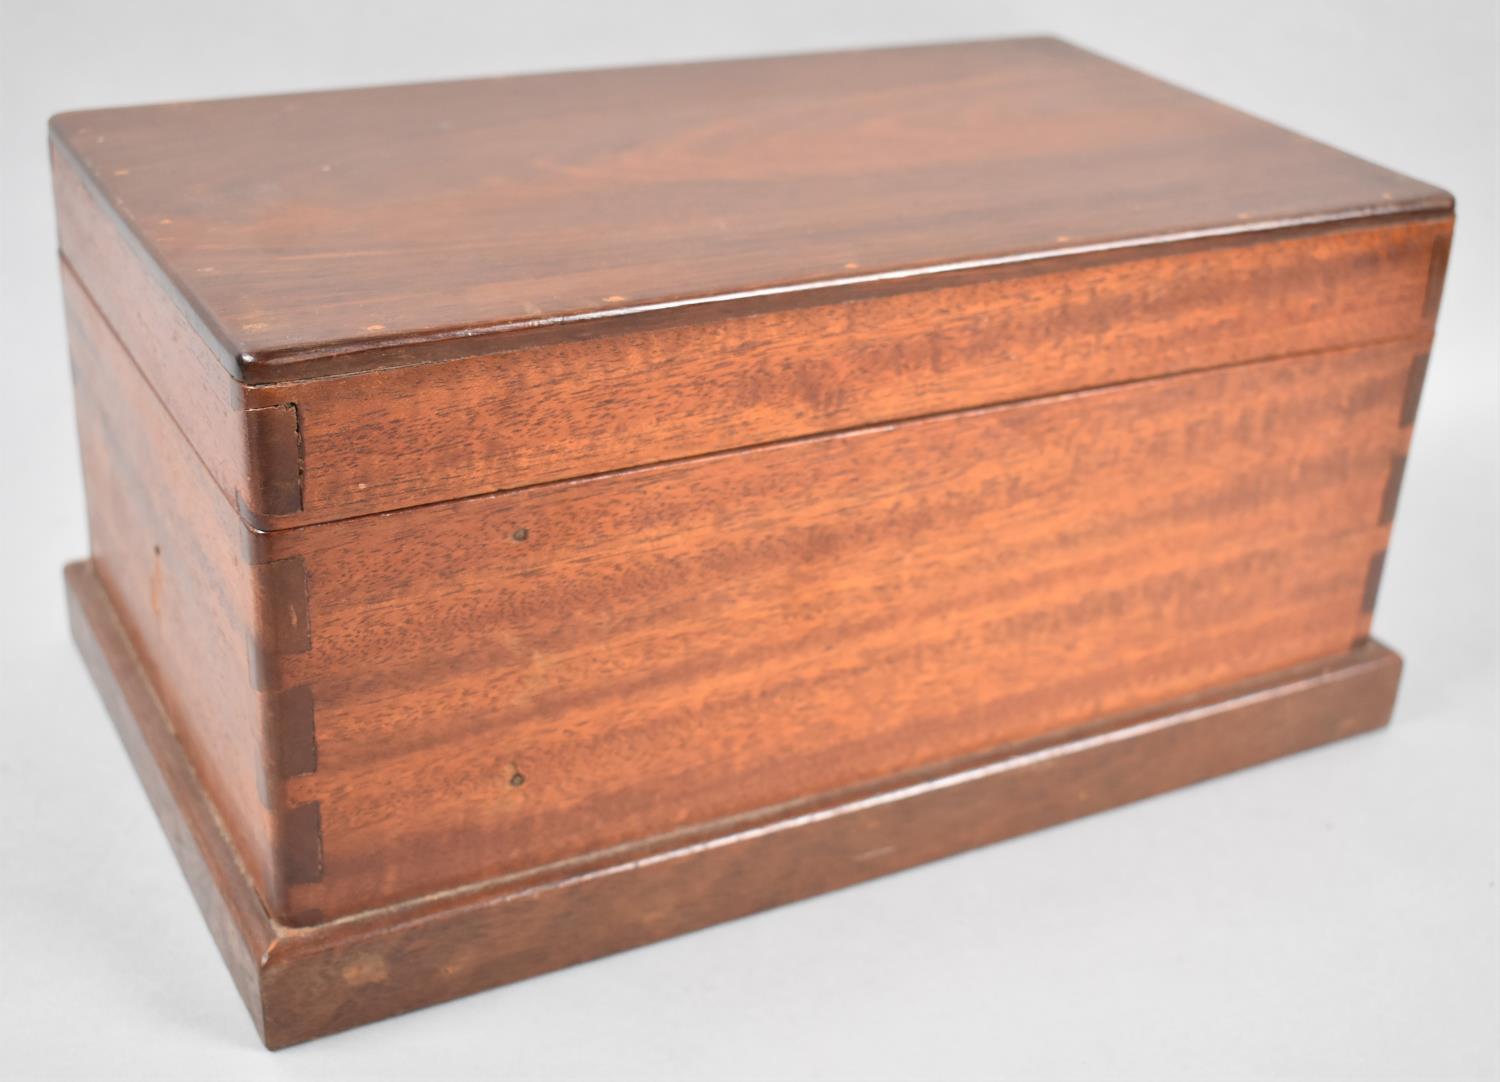 A Late Victorian/Edwardian Mahogany Games Box with Fitted Interior for Two Packs Cards, Pieces